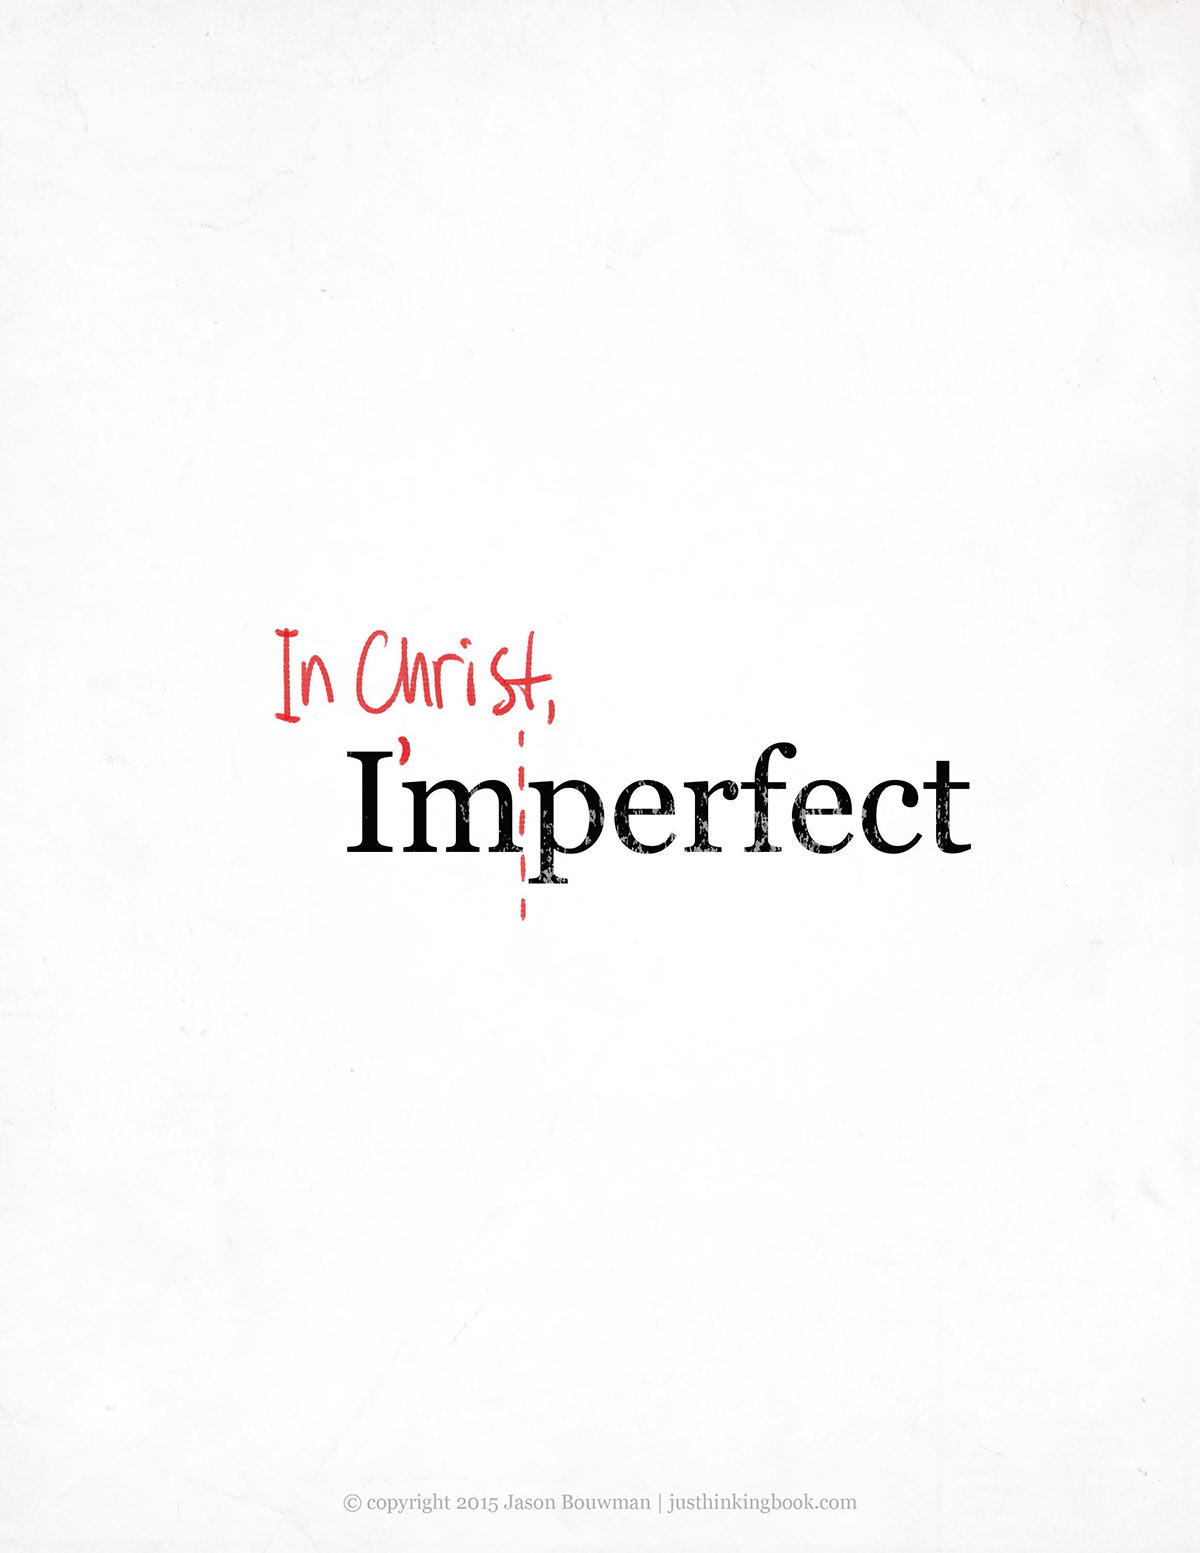 Poster: Imperfect?